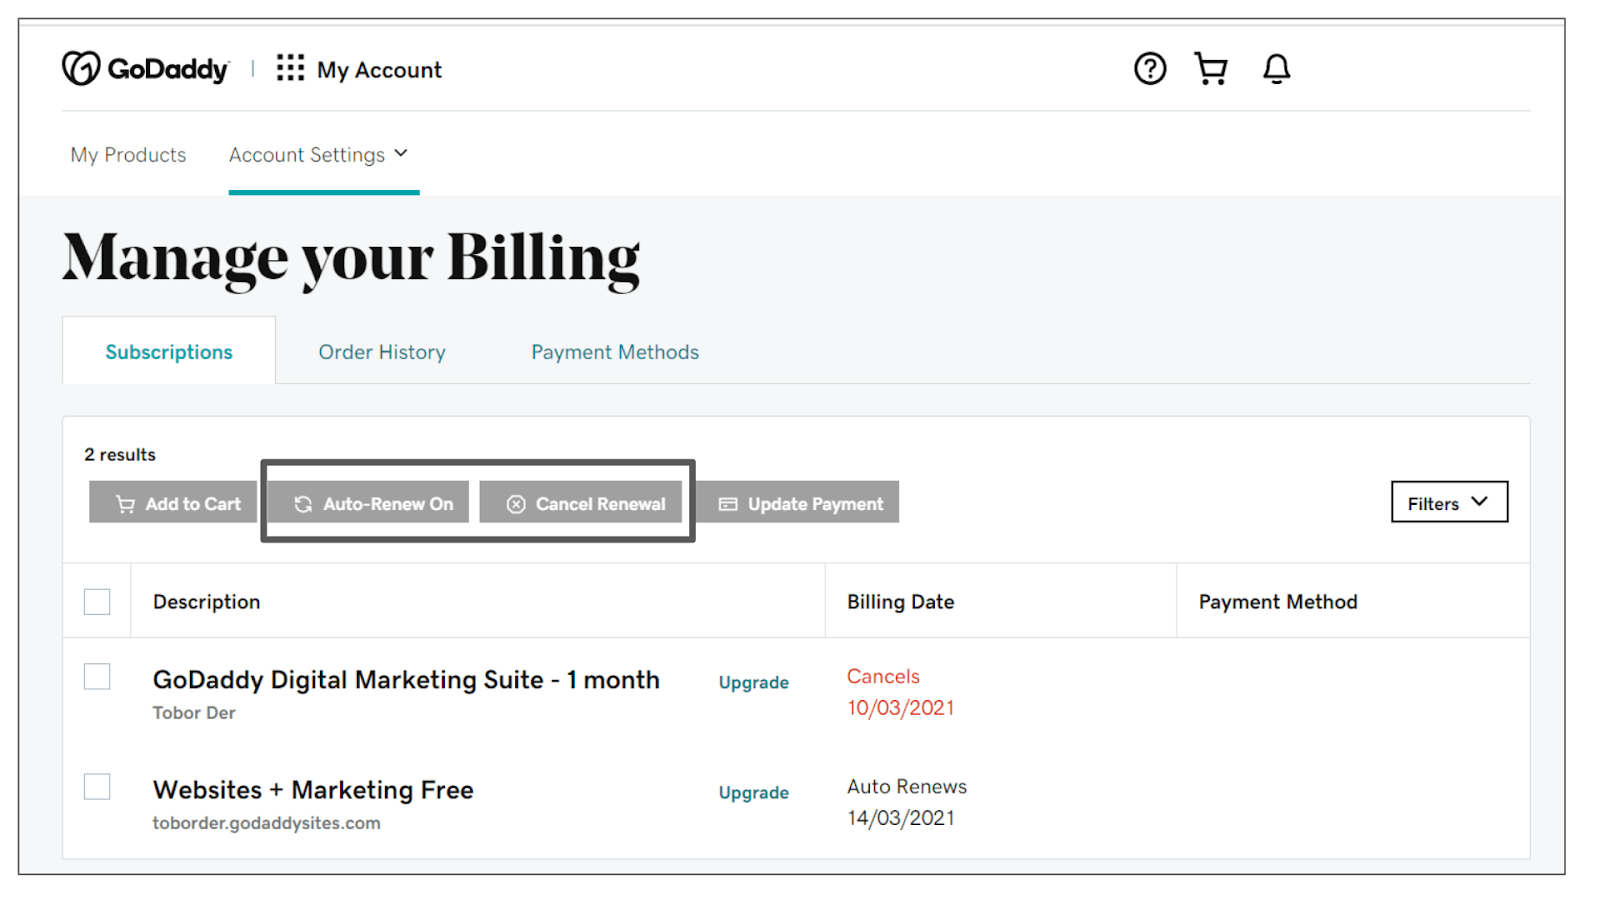 GoDaddy Manage your Billing page.